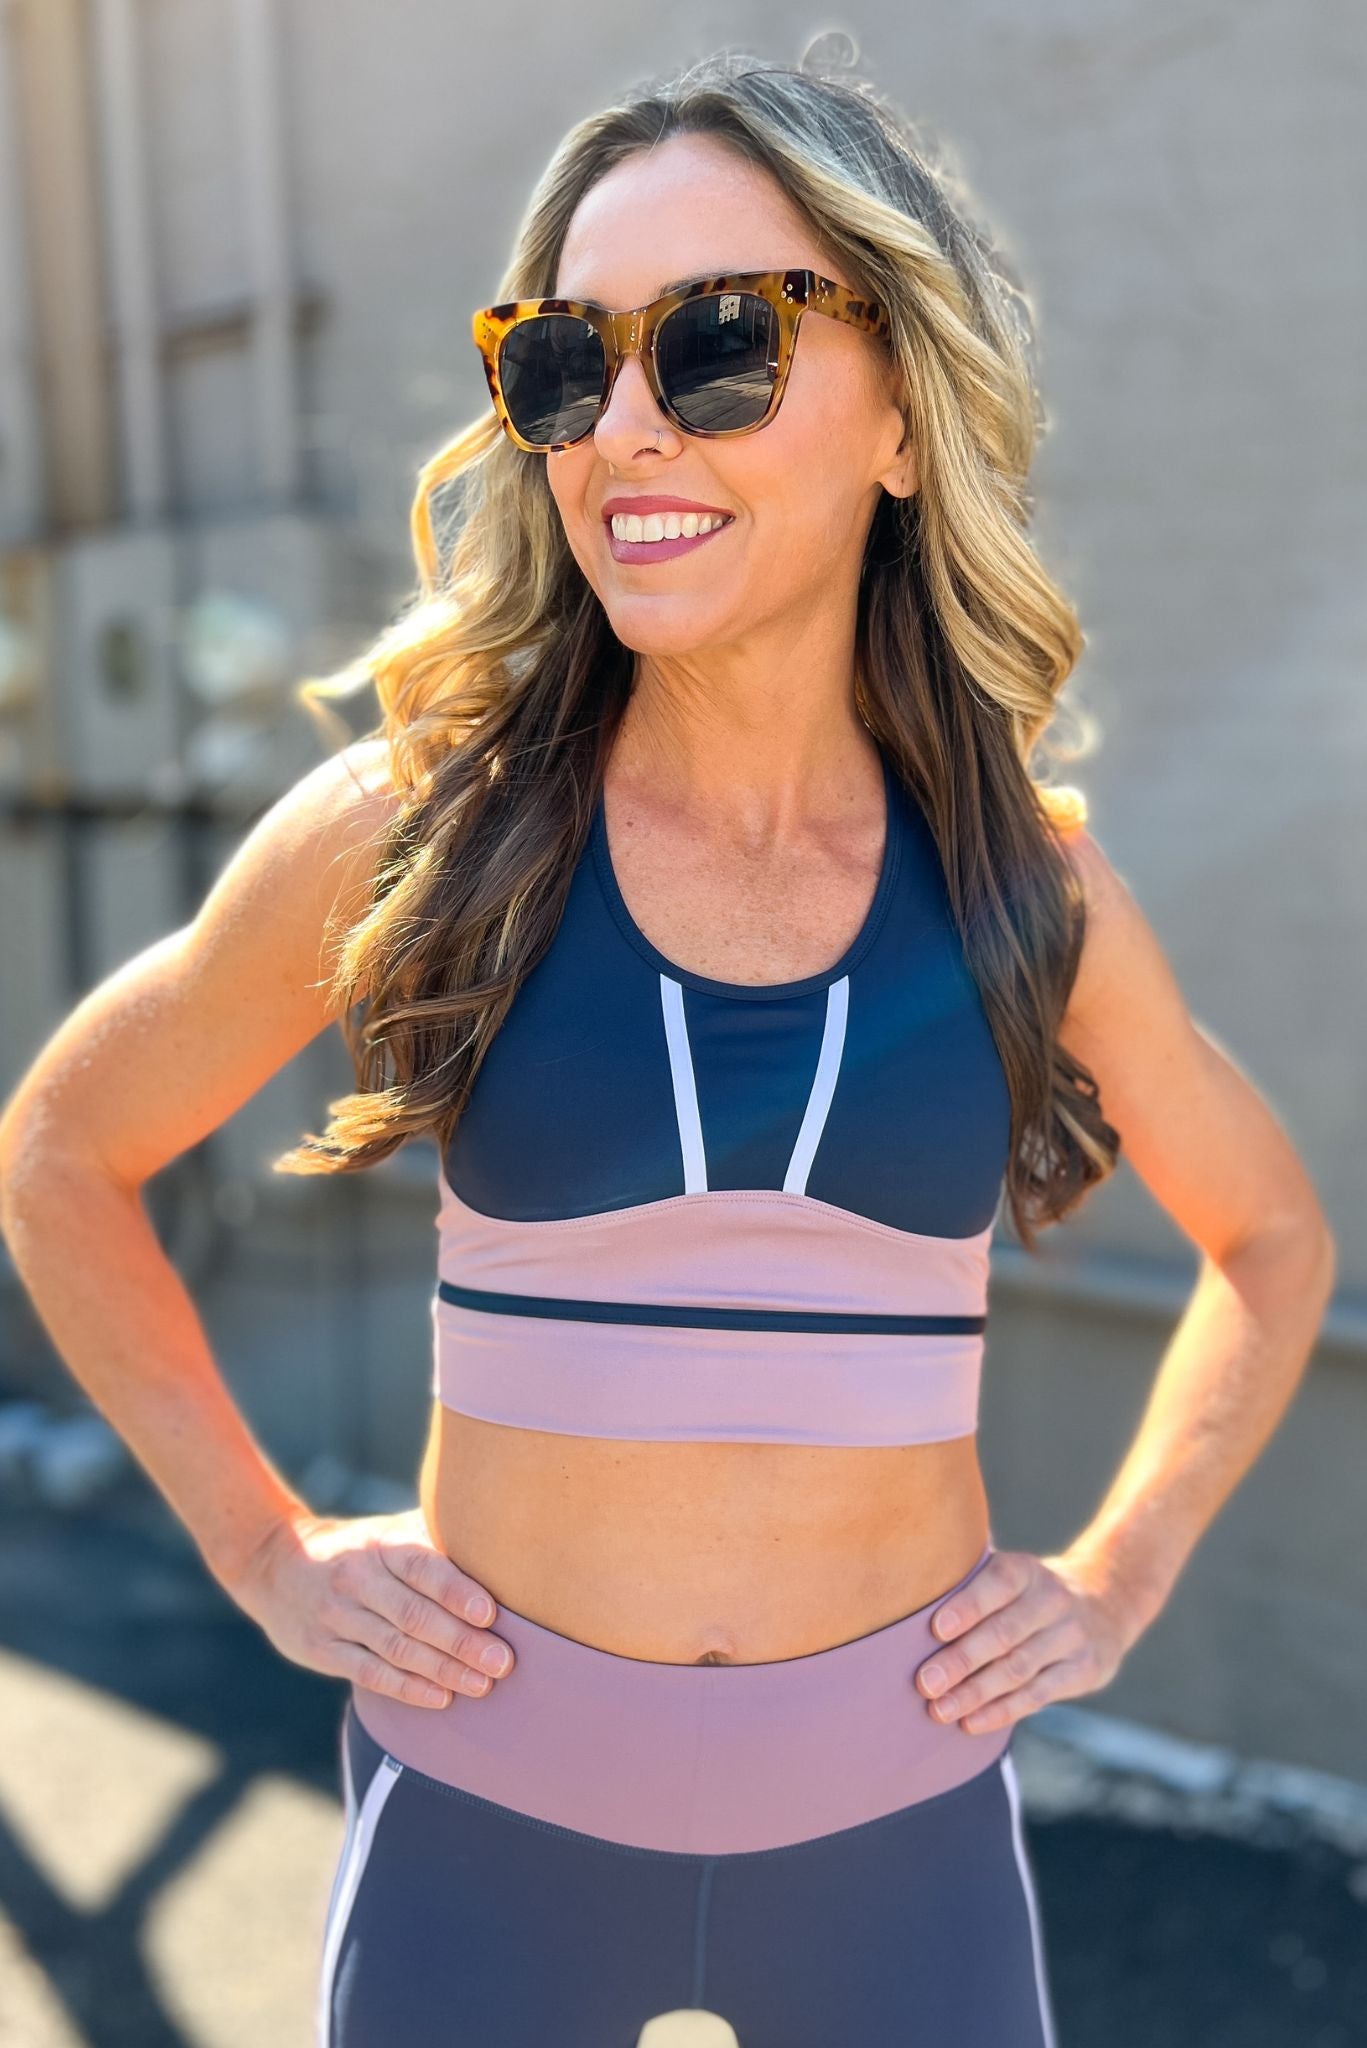 Load image into Gallery viewer, Navy Sports Bra With Mauve Contrast and White Racing Stripes SSYS The Label, athleisure, everyday wear, mom style, layered look, must have, shop style your senses by mallory fitzsimmons
